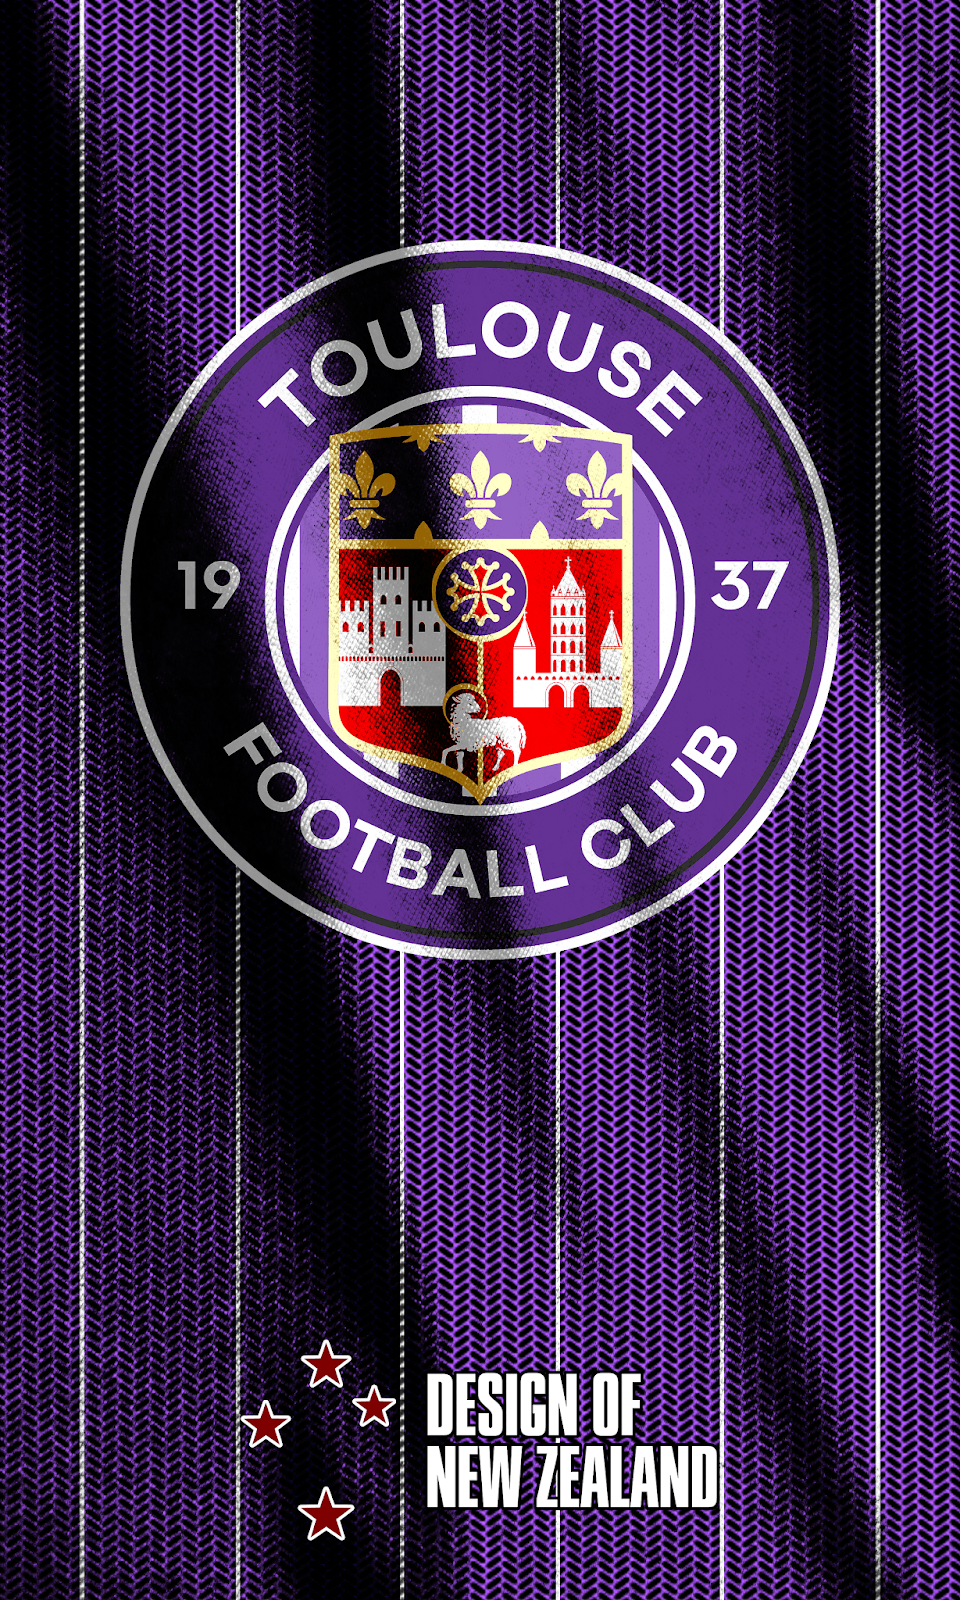 Wallpapers Toulouse FC